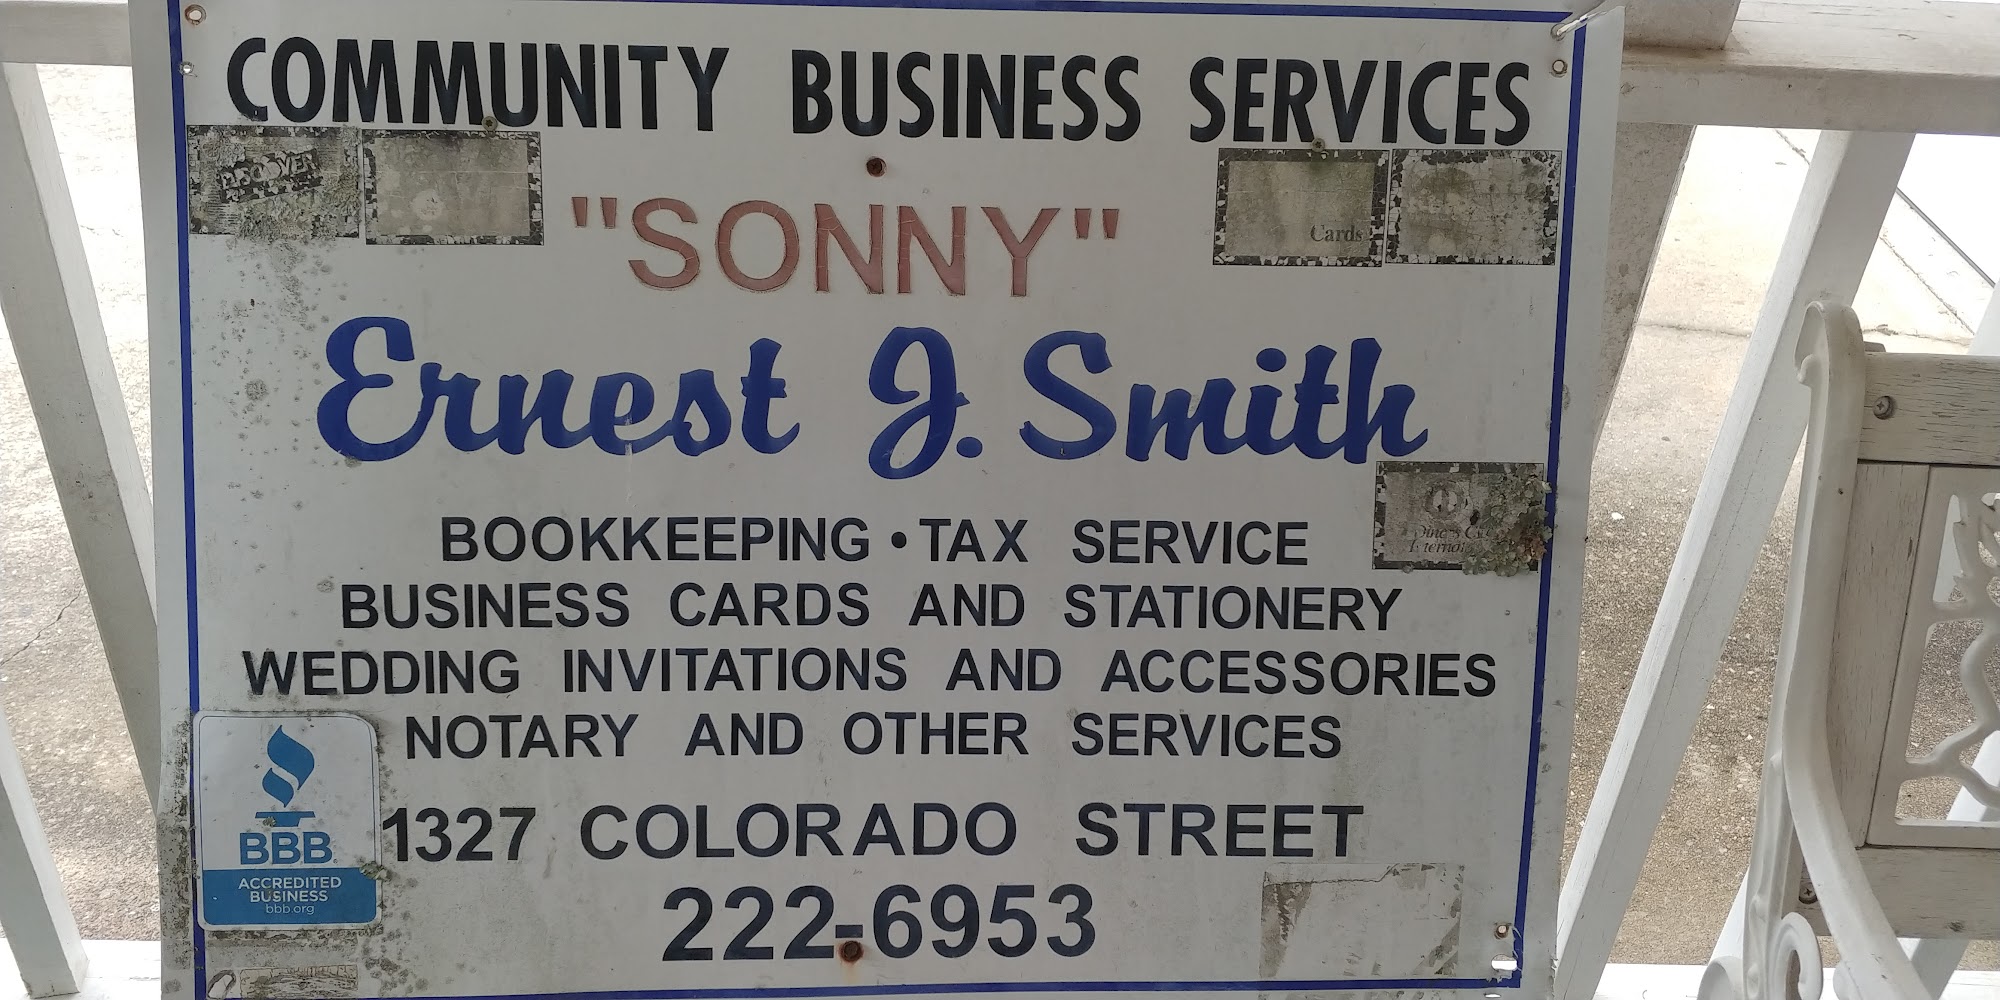 Community Business Services